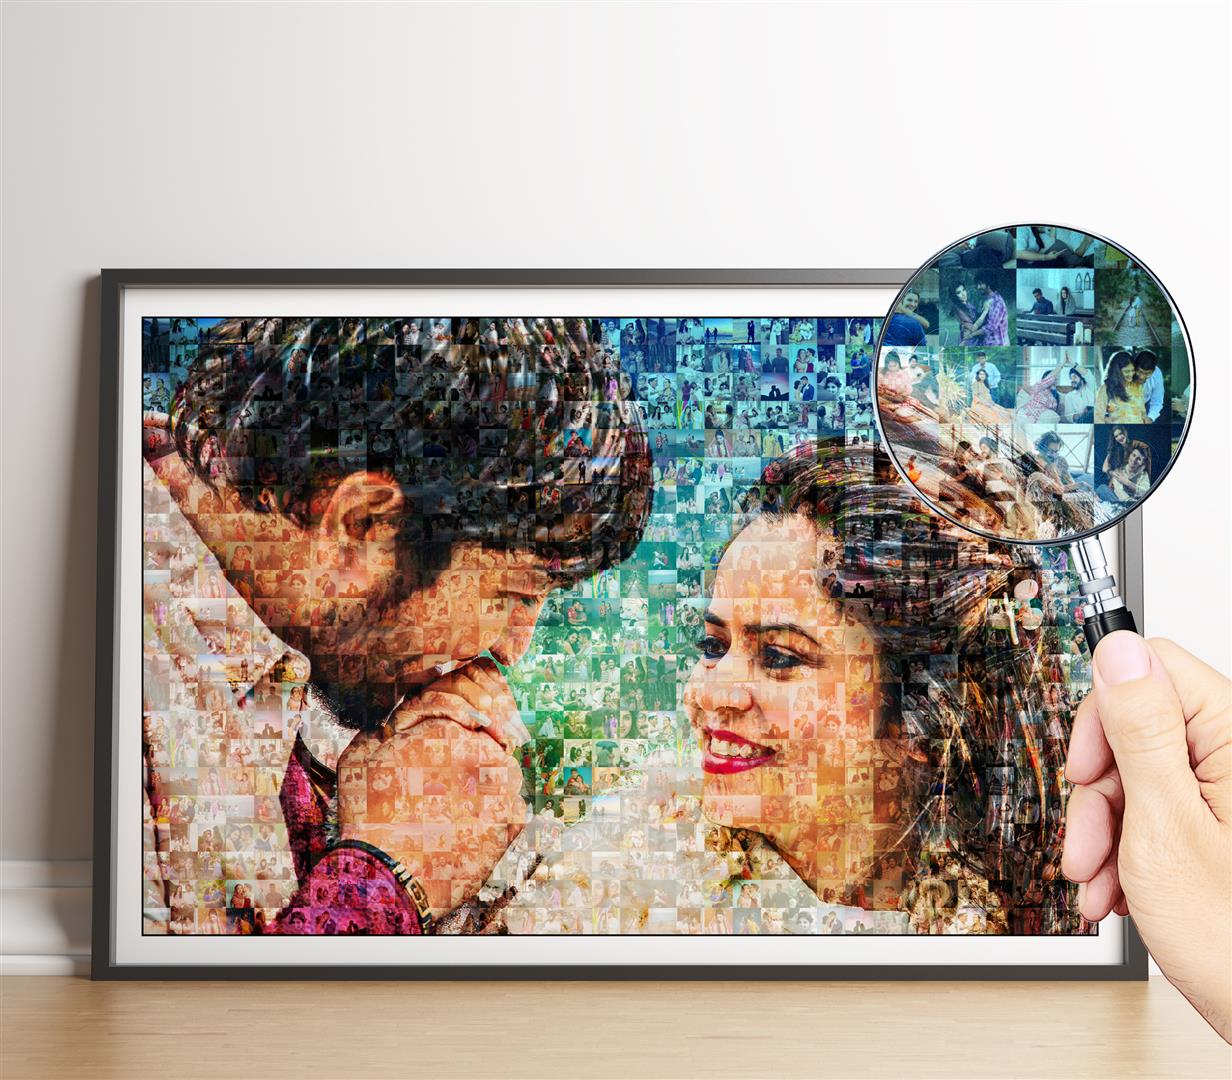 Photo mosaic gift featuring unique wedding gifts for couples